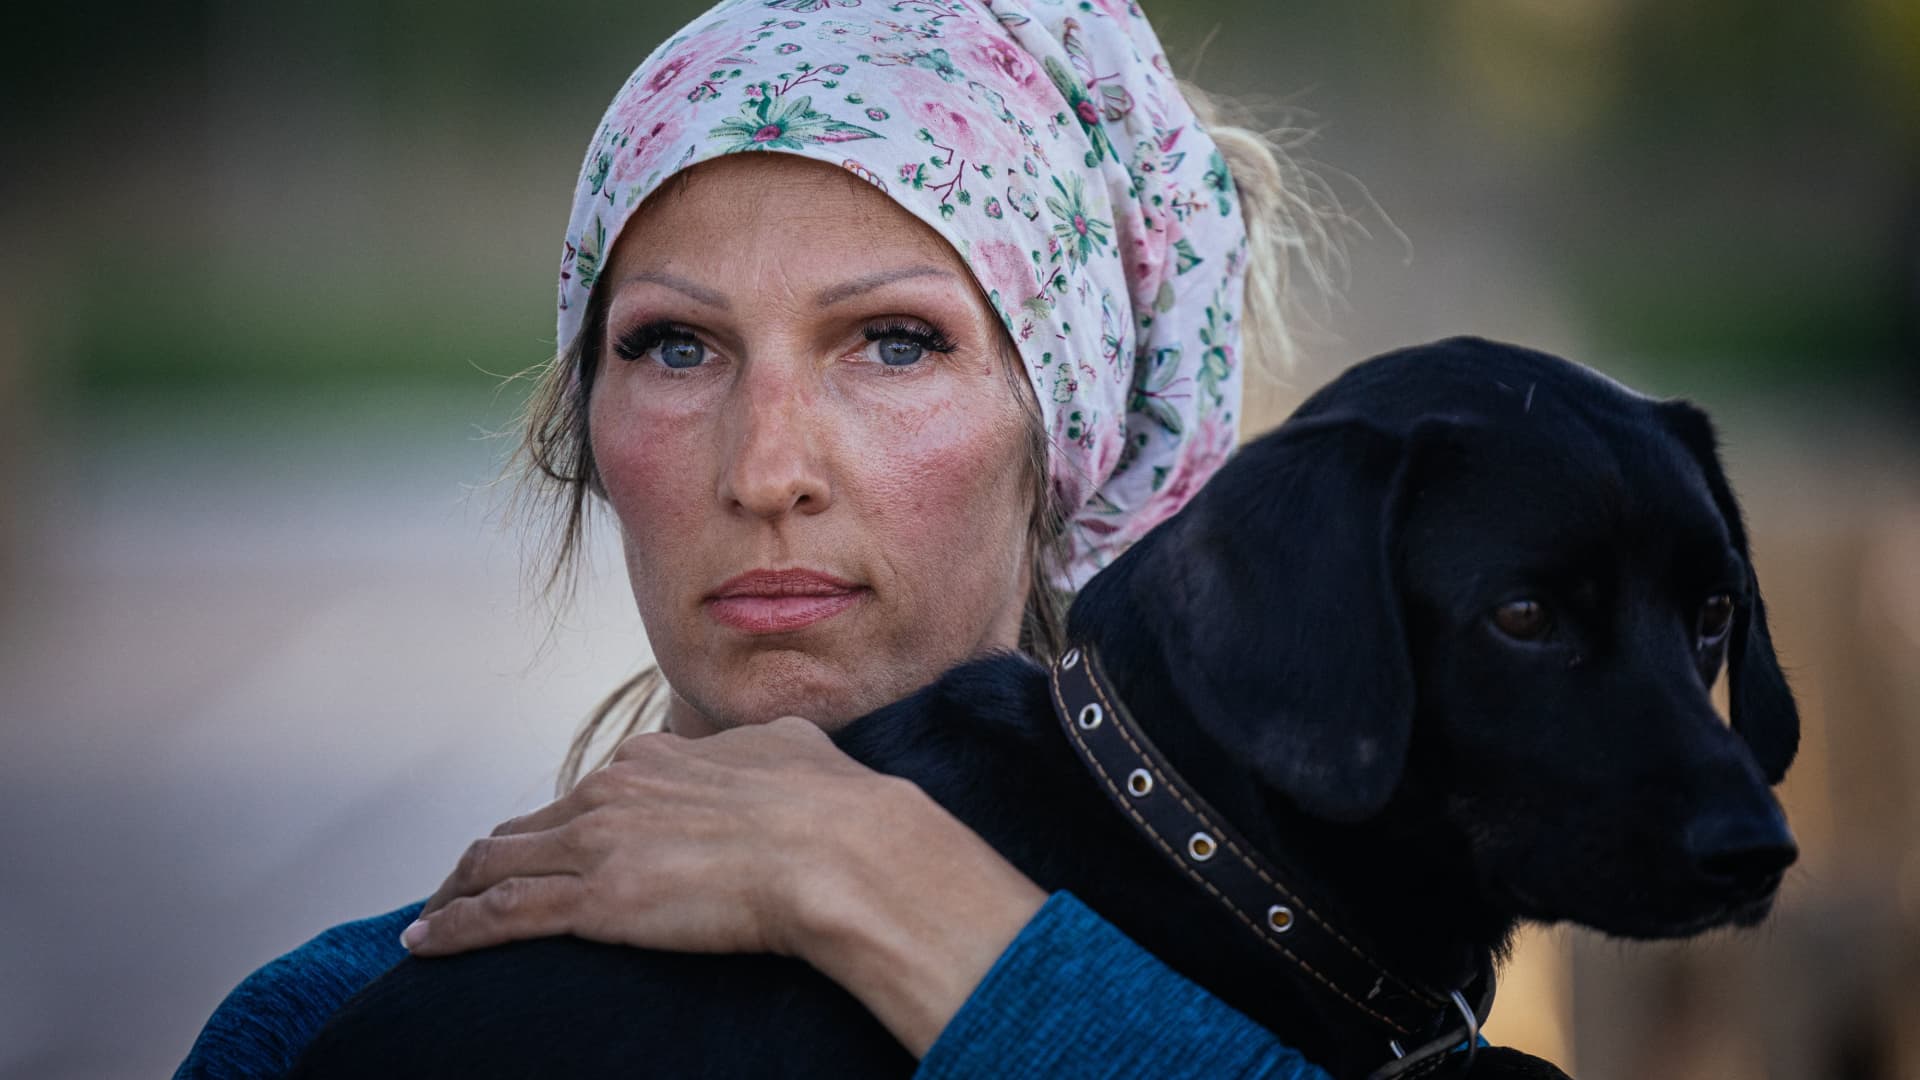 A woman holds her dog after arriving from Russian-occupied territory at a registration and processing area for internally displaced people in Zaporizhzhia, in Ukraine, on May 8, 2022.